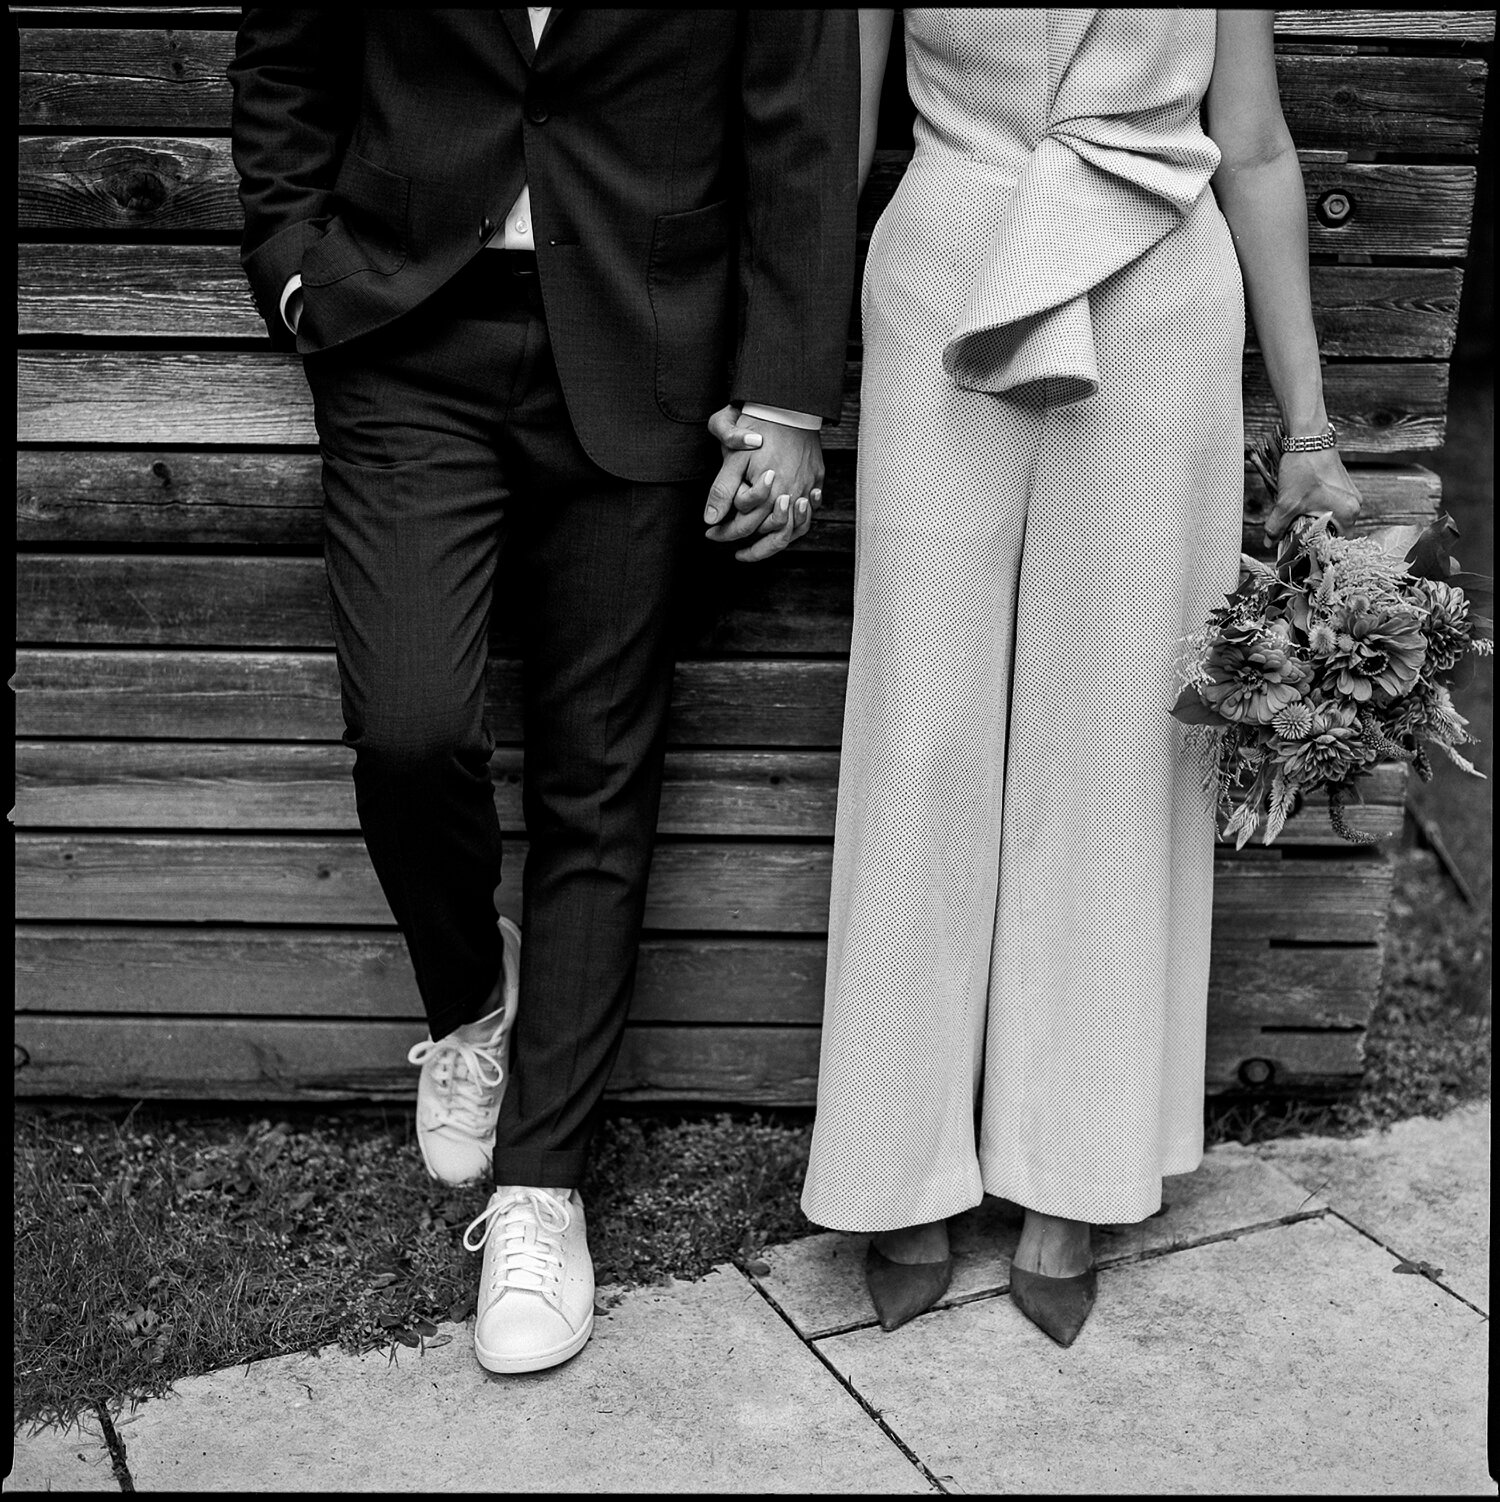 Bride-and-Groom-wearing-Sneakers-and-blue-heels-for-wedding-analog-wedding-photographers-toronto-ontario-canada-vintage-vibes-trendy-modern-downtown-toronto-restaurant-wedding-candid-portrait-quiet-moment-black-and-white-film-photography.JPG